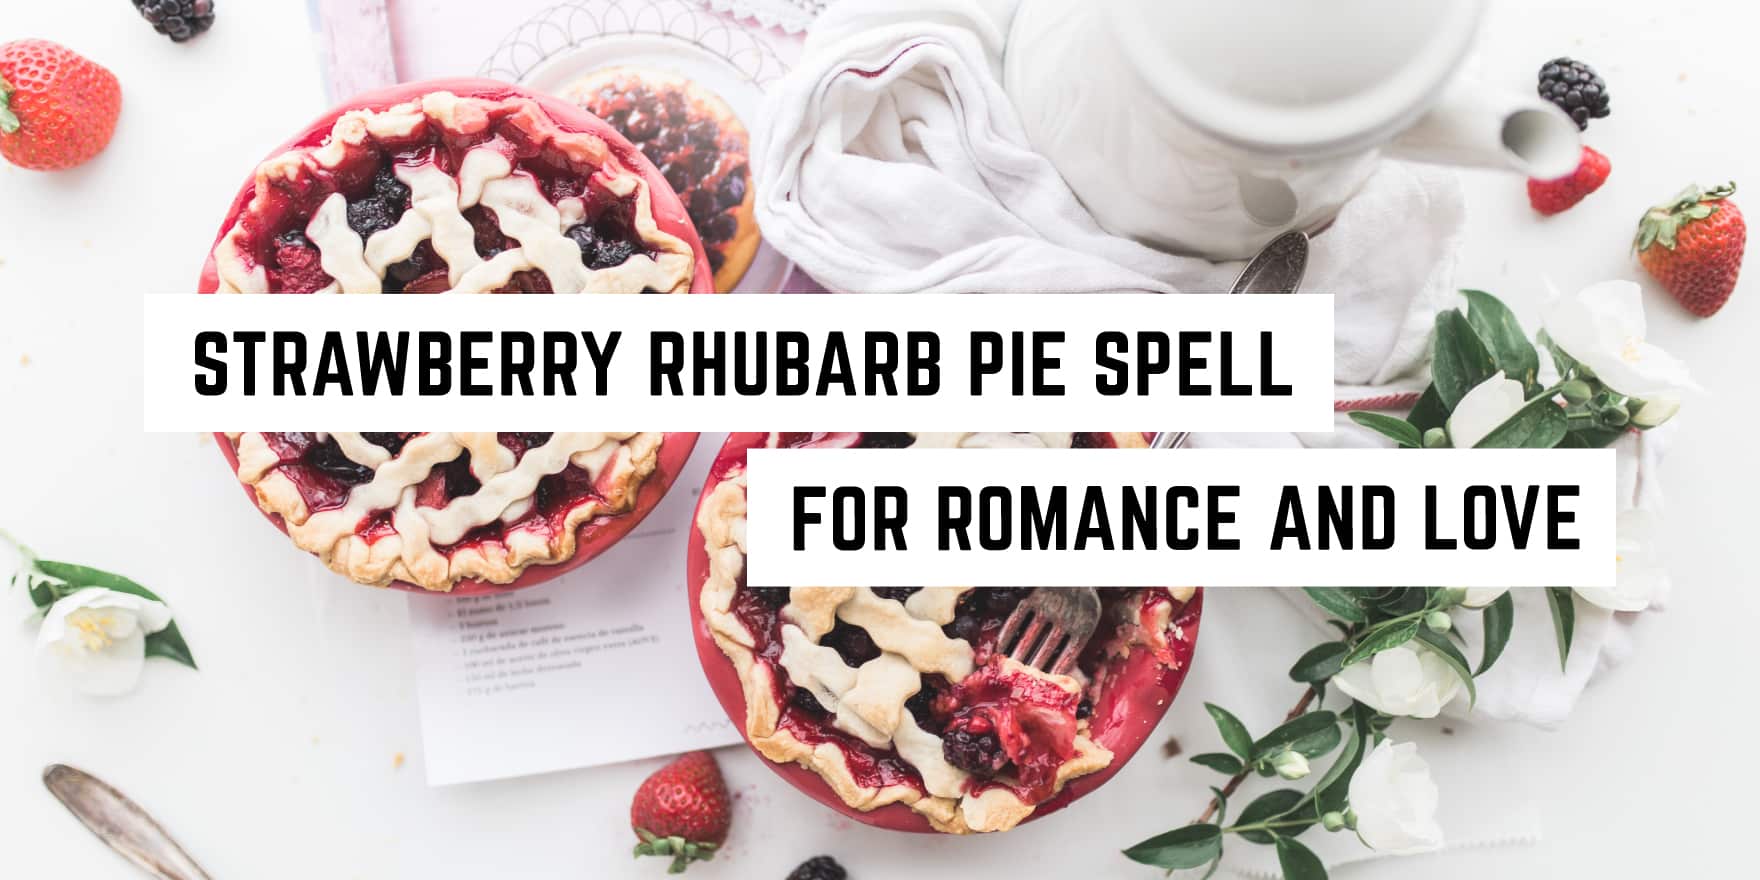 A flat lay of delicious strawberry rhubarb pies next to fresh berries, with a whimsical caption alluding to a sweet dessert's magical charm for love, showcasing the pies as a new age product